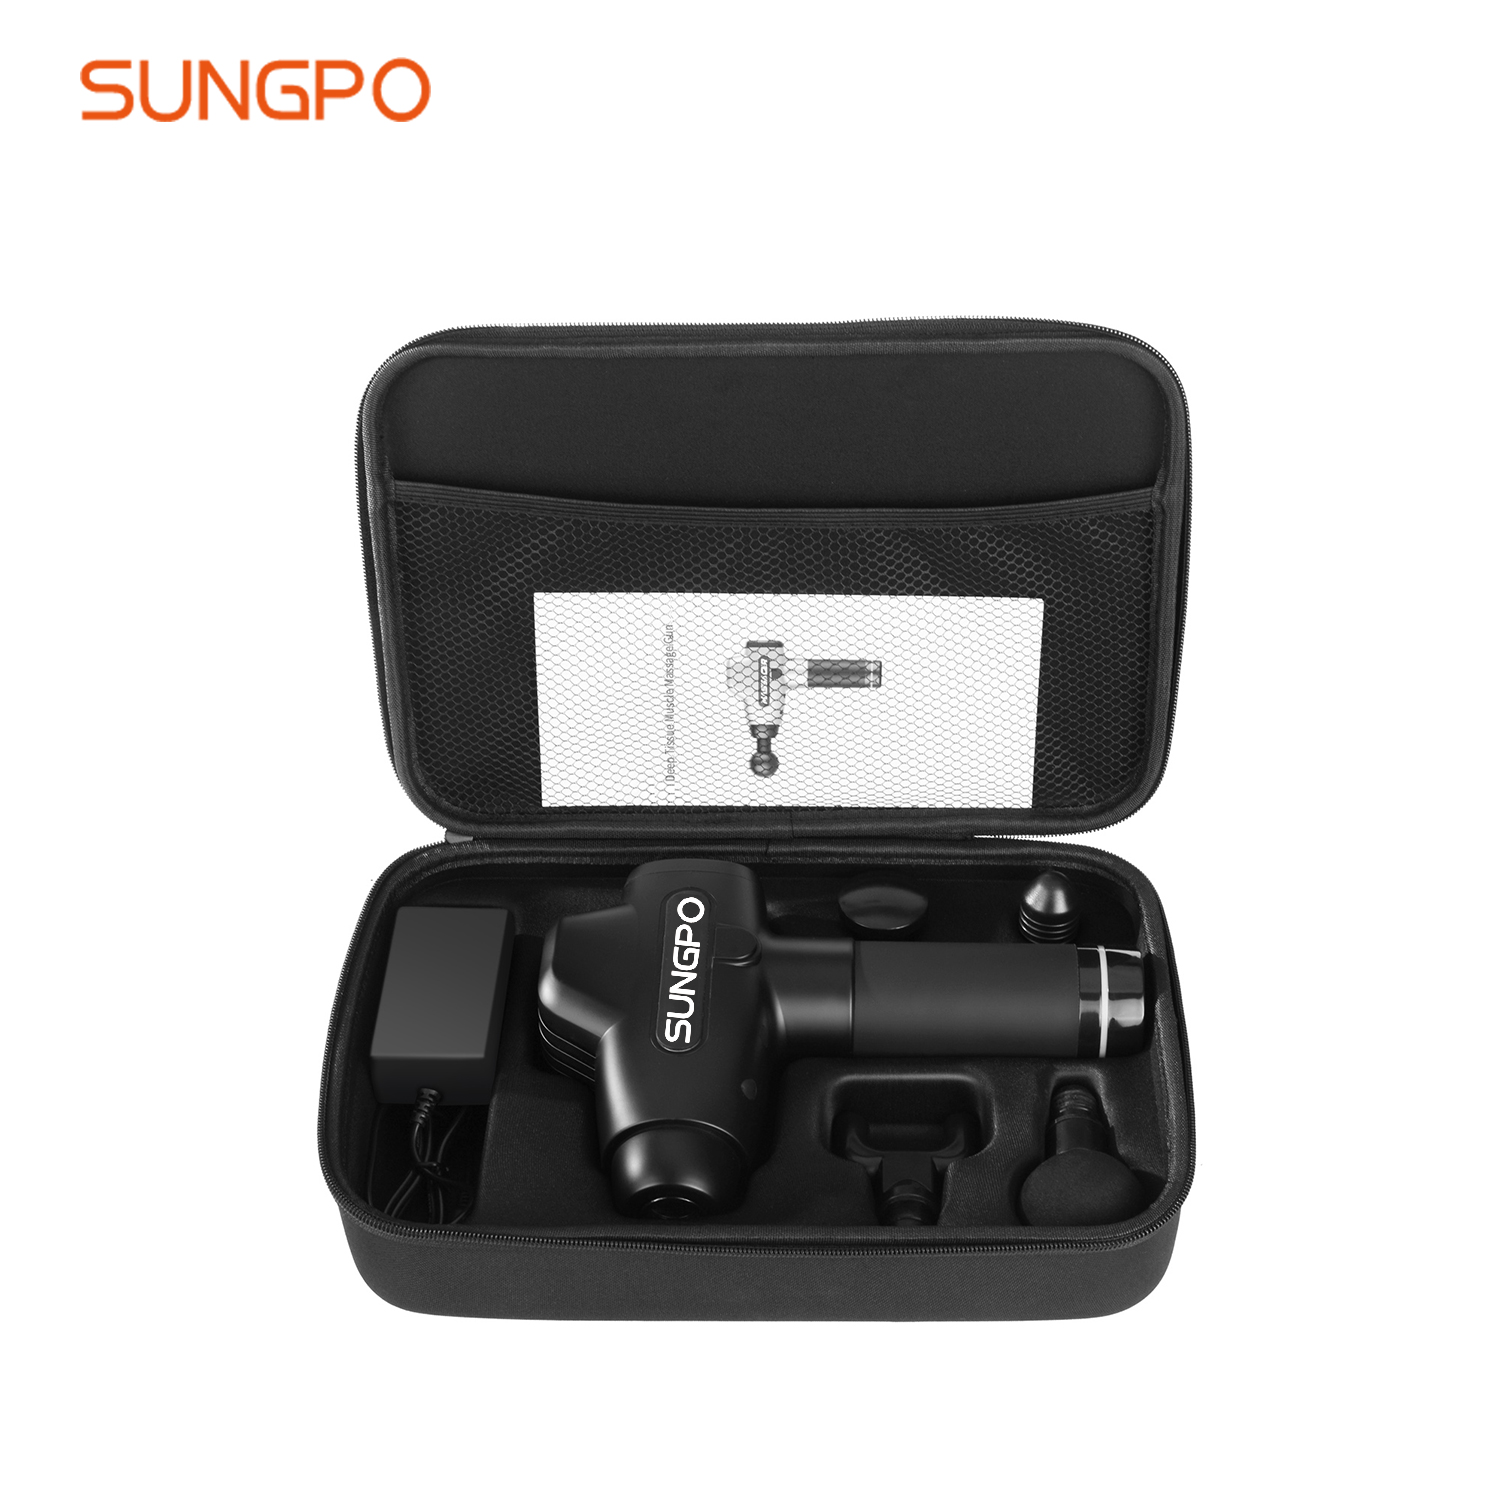 SUNGPO professional massage gun factory direct supply for exercise-1